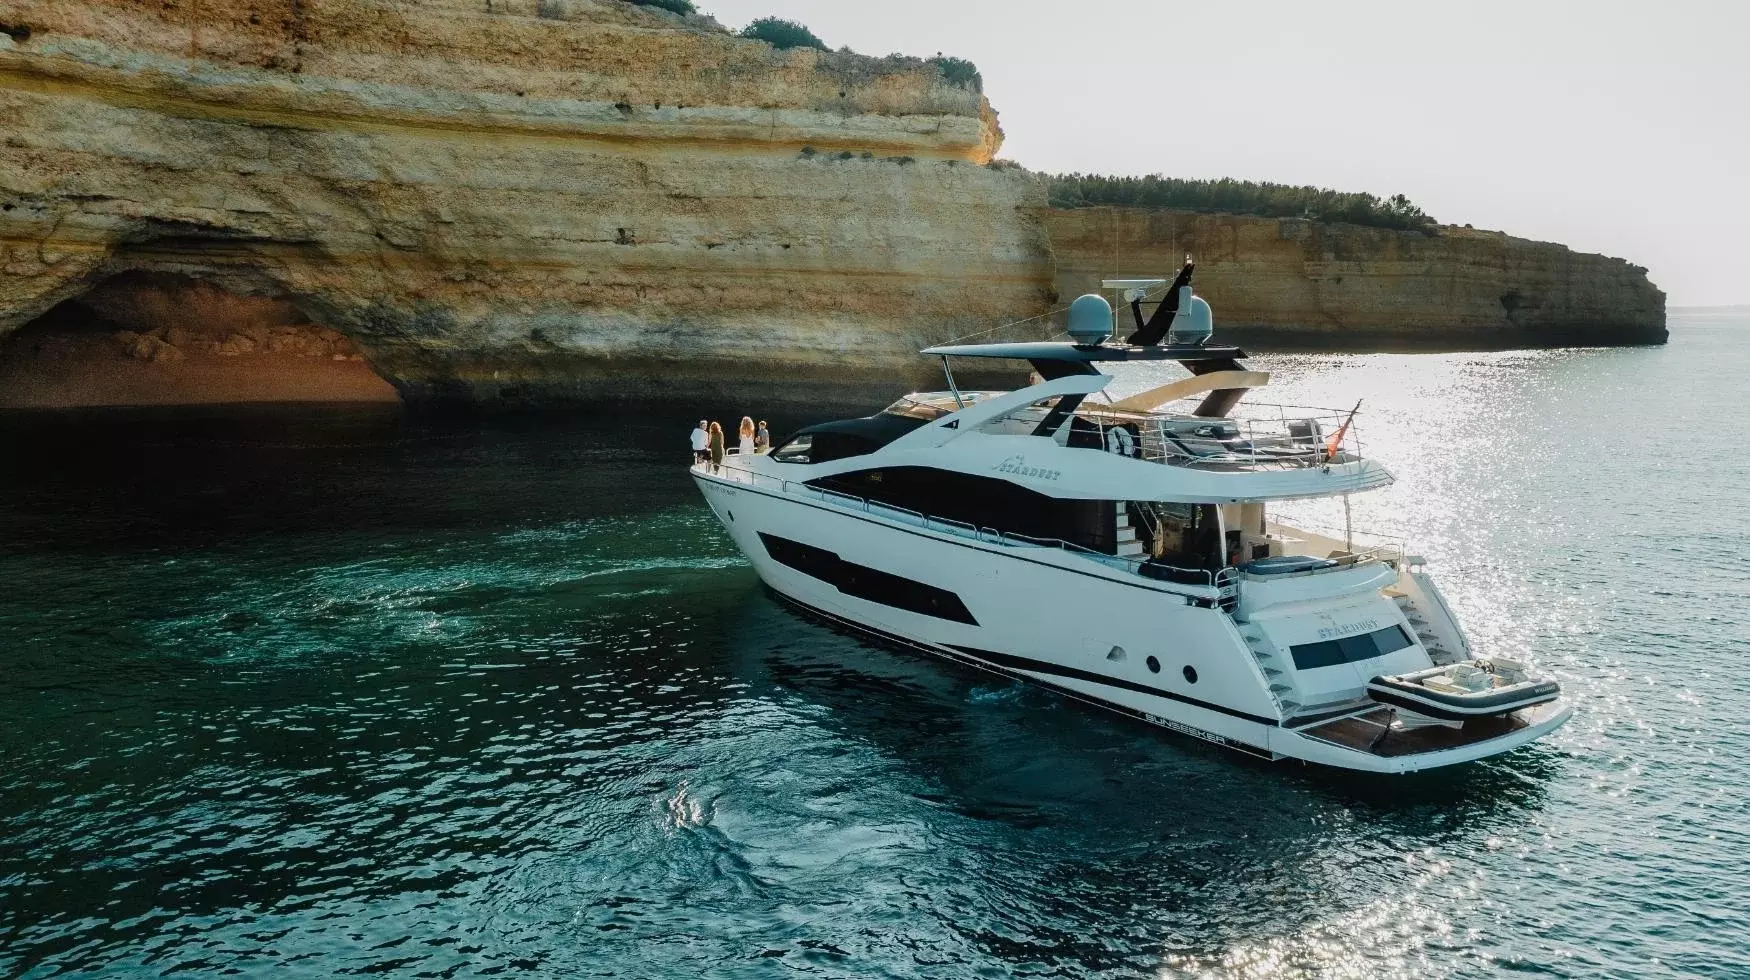 Stardust of Mary by Sunseeker - Special Offer for a private Motor Yacht Charter in Formentera with a crew